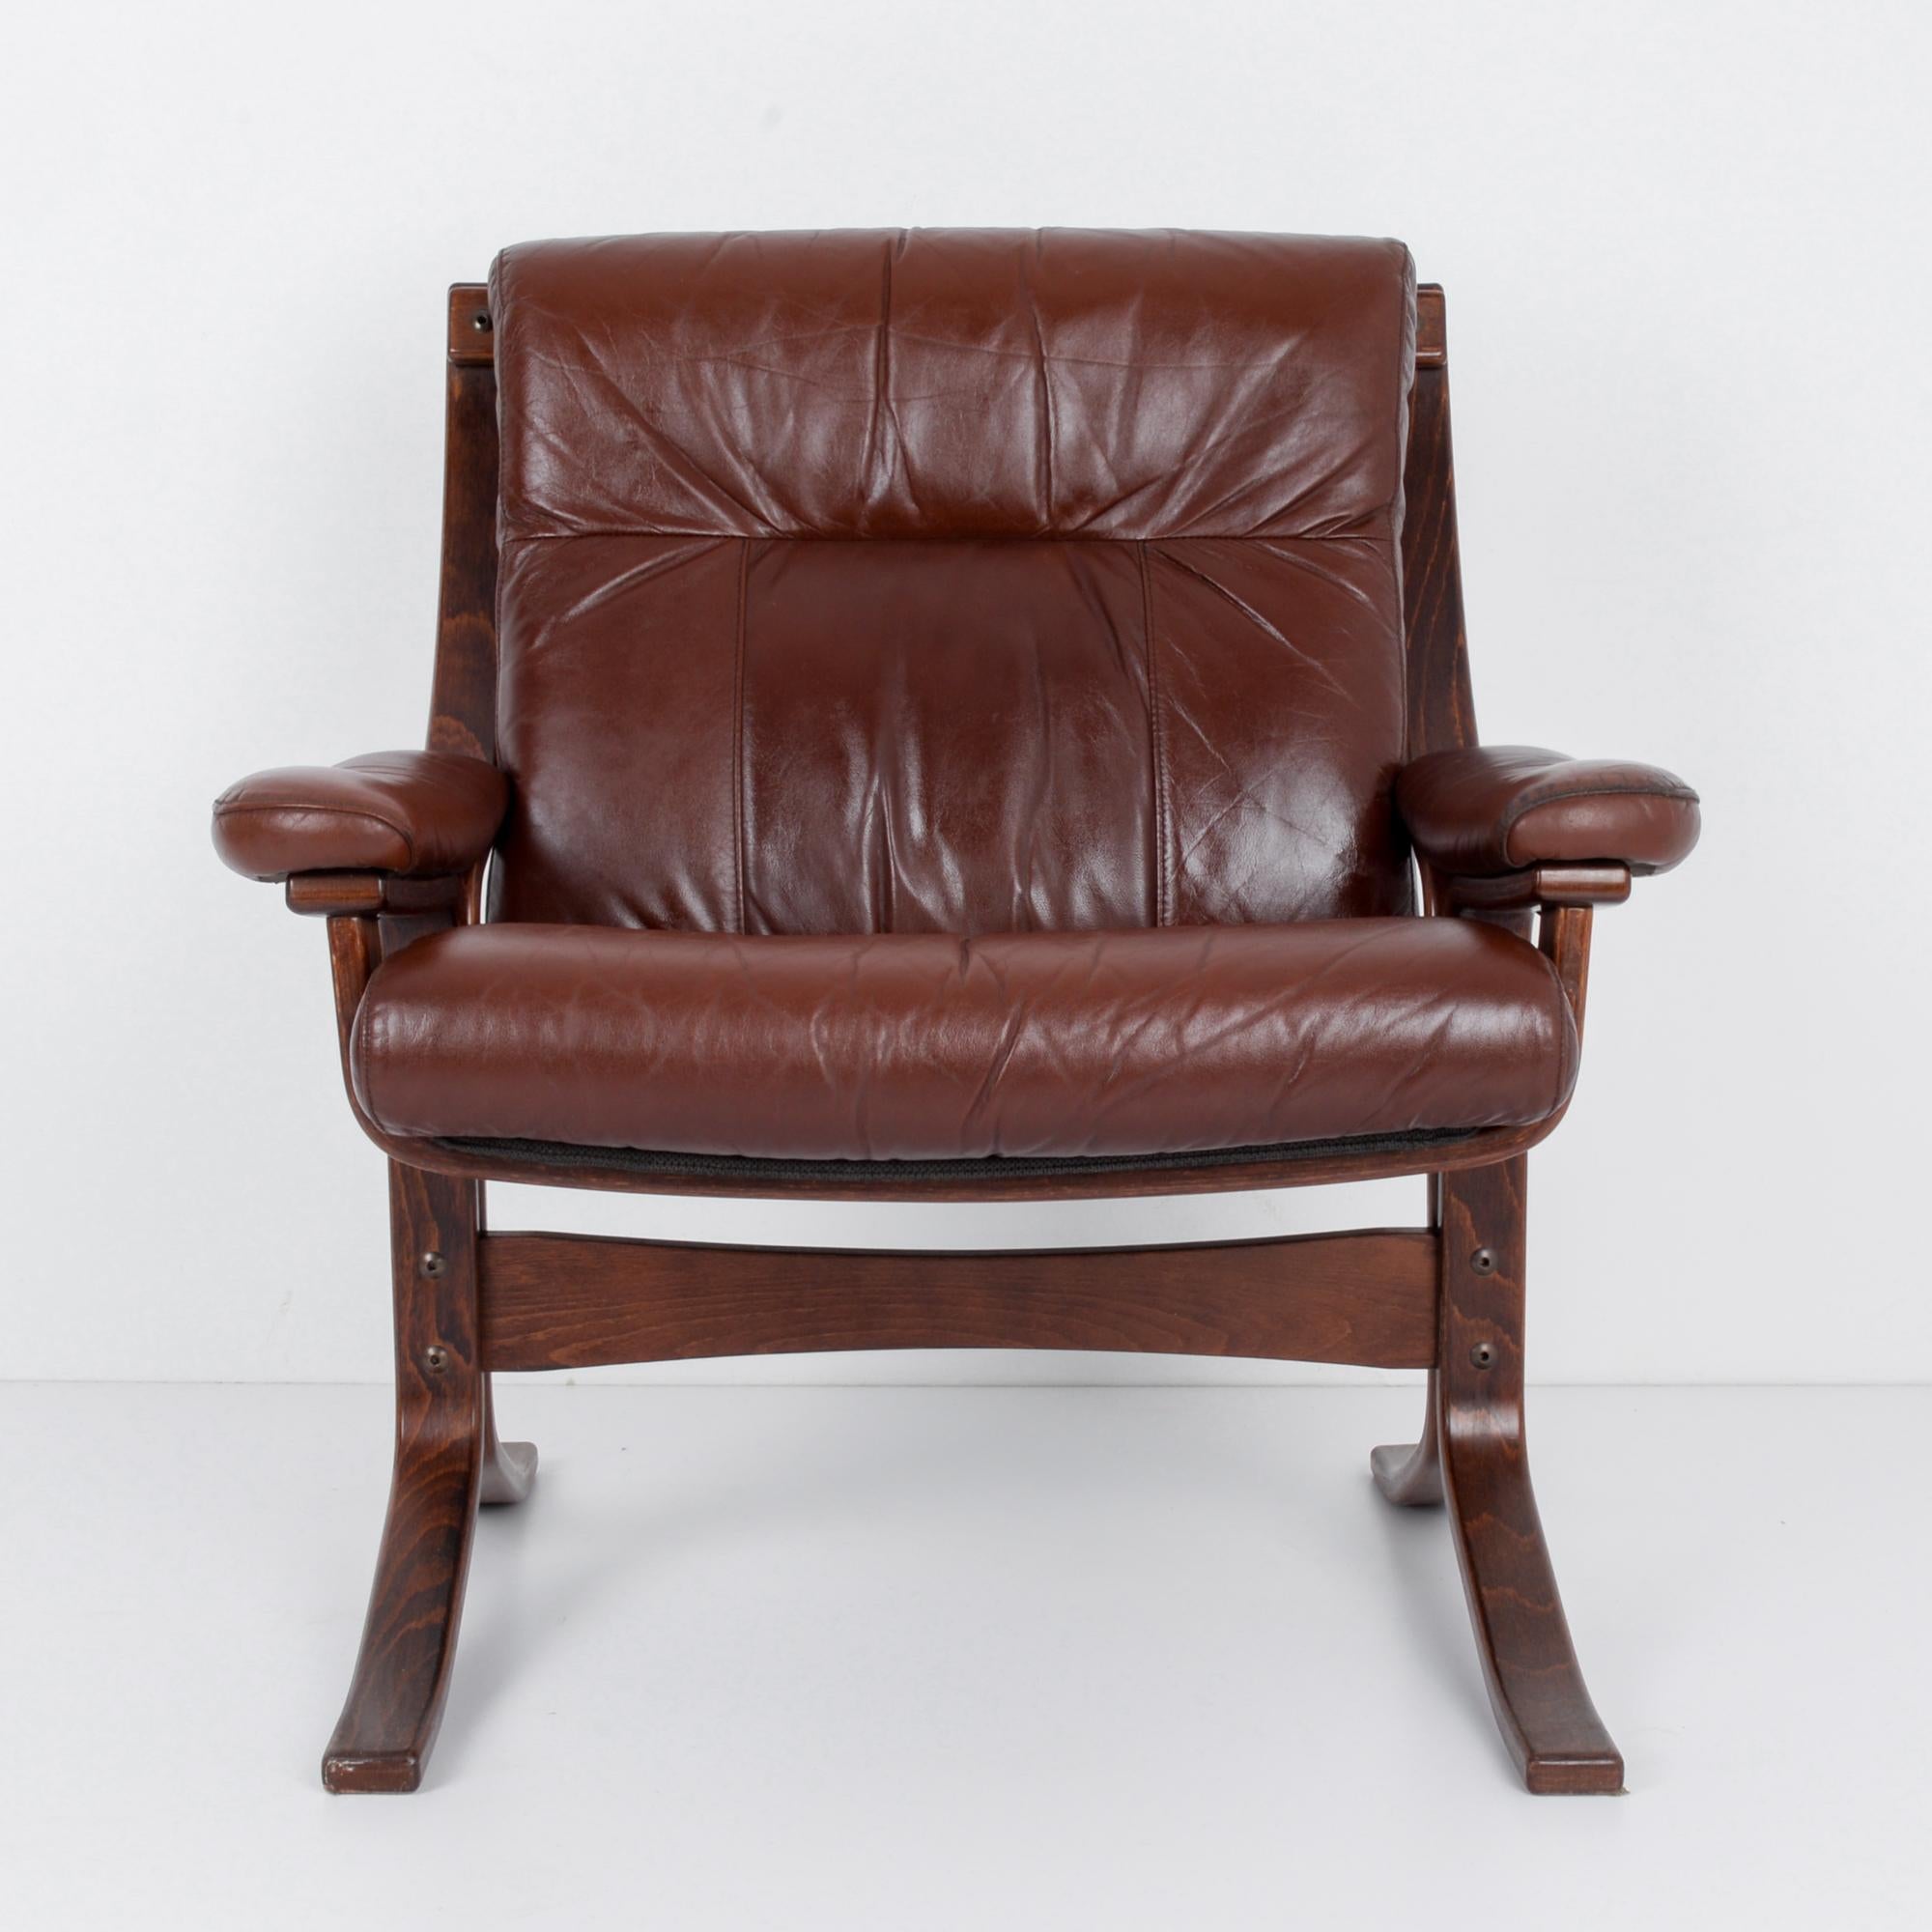 A wooden armchair from Norway with leather seat and back, circa 1970. Luxe comfort, remains sleek while being plush. Easy chair for an approachable intellectual, your new favorite lounge, the centerpiece for a space. Tension of the bent wood